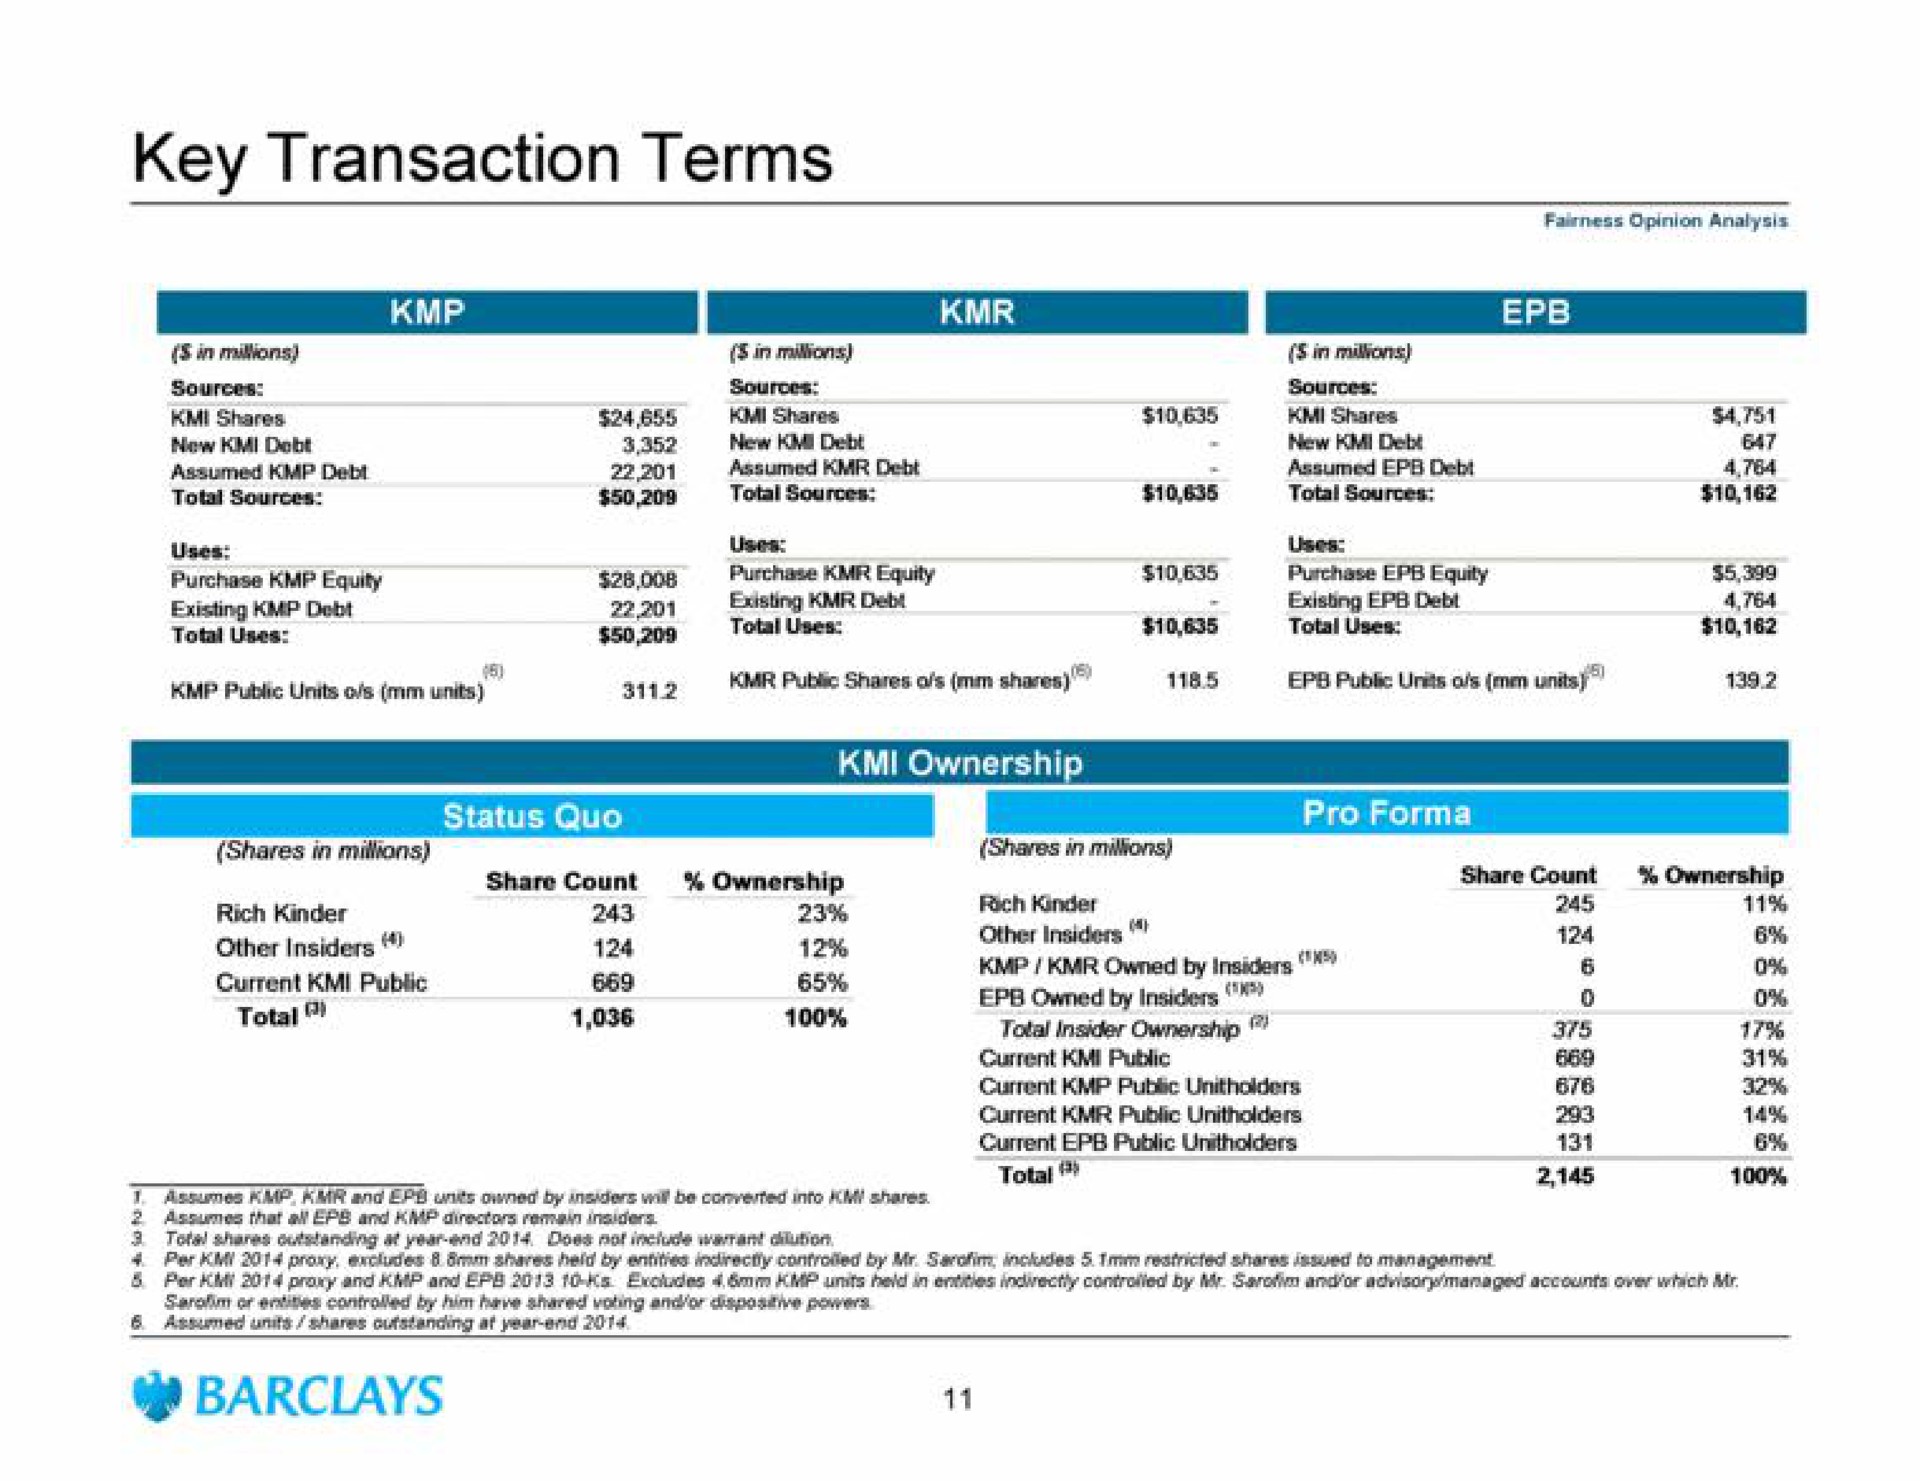 key transaction terms total insider ownership | Barclays